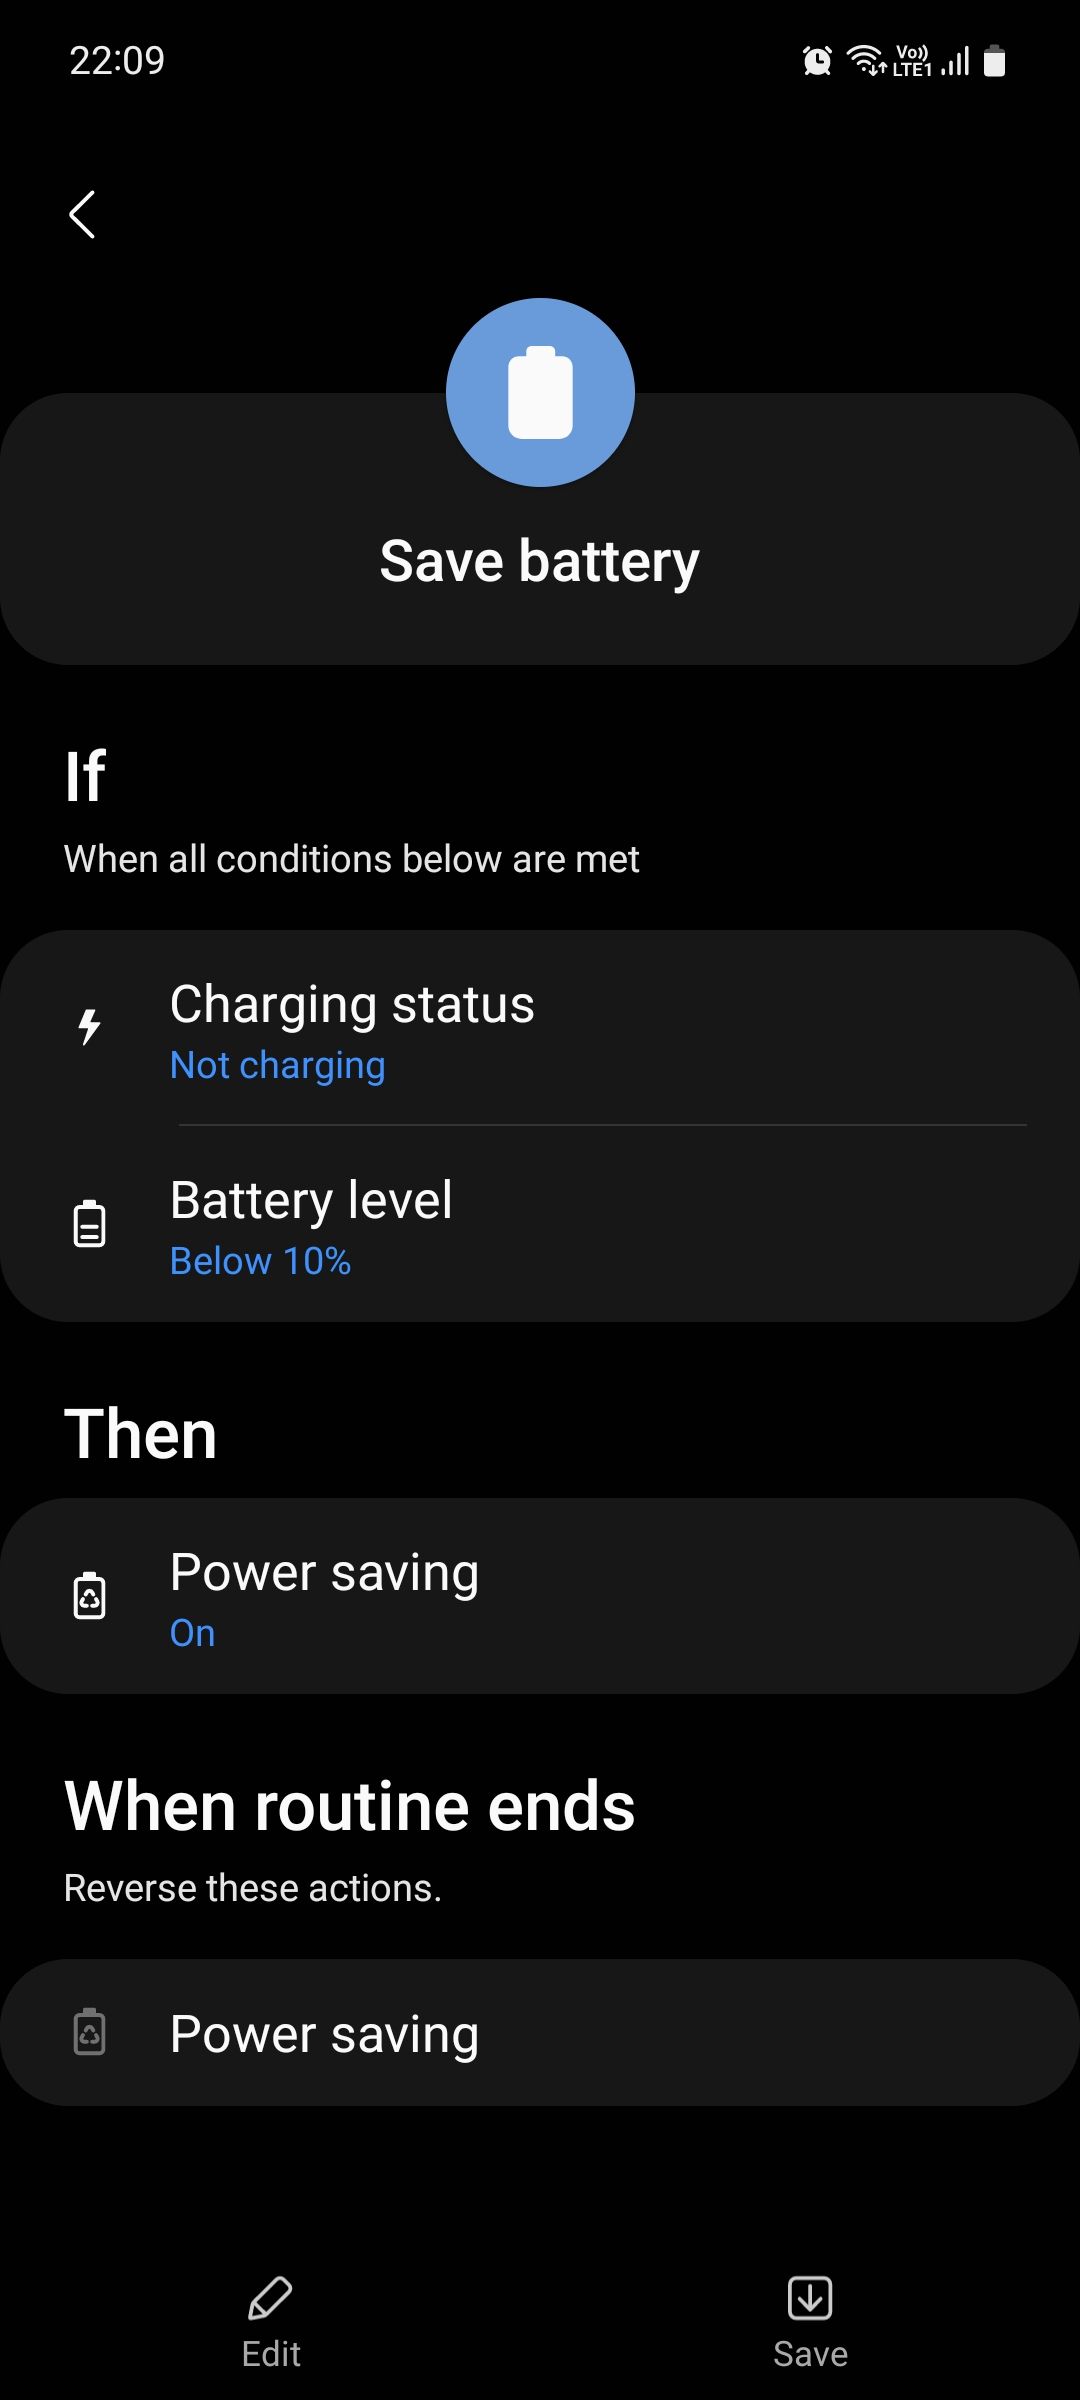 Save battery routine on Samsung Modes and Routines